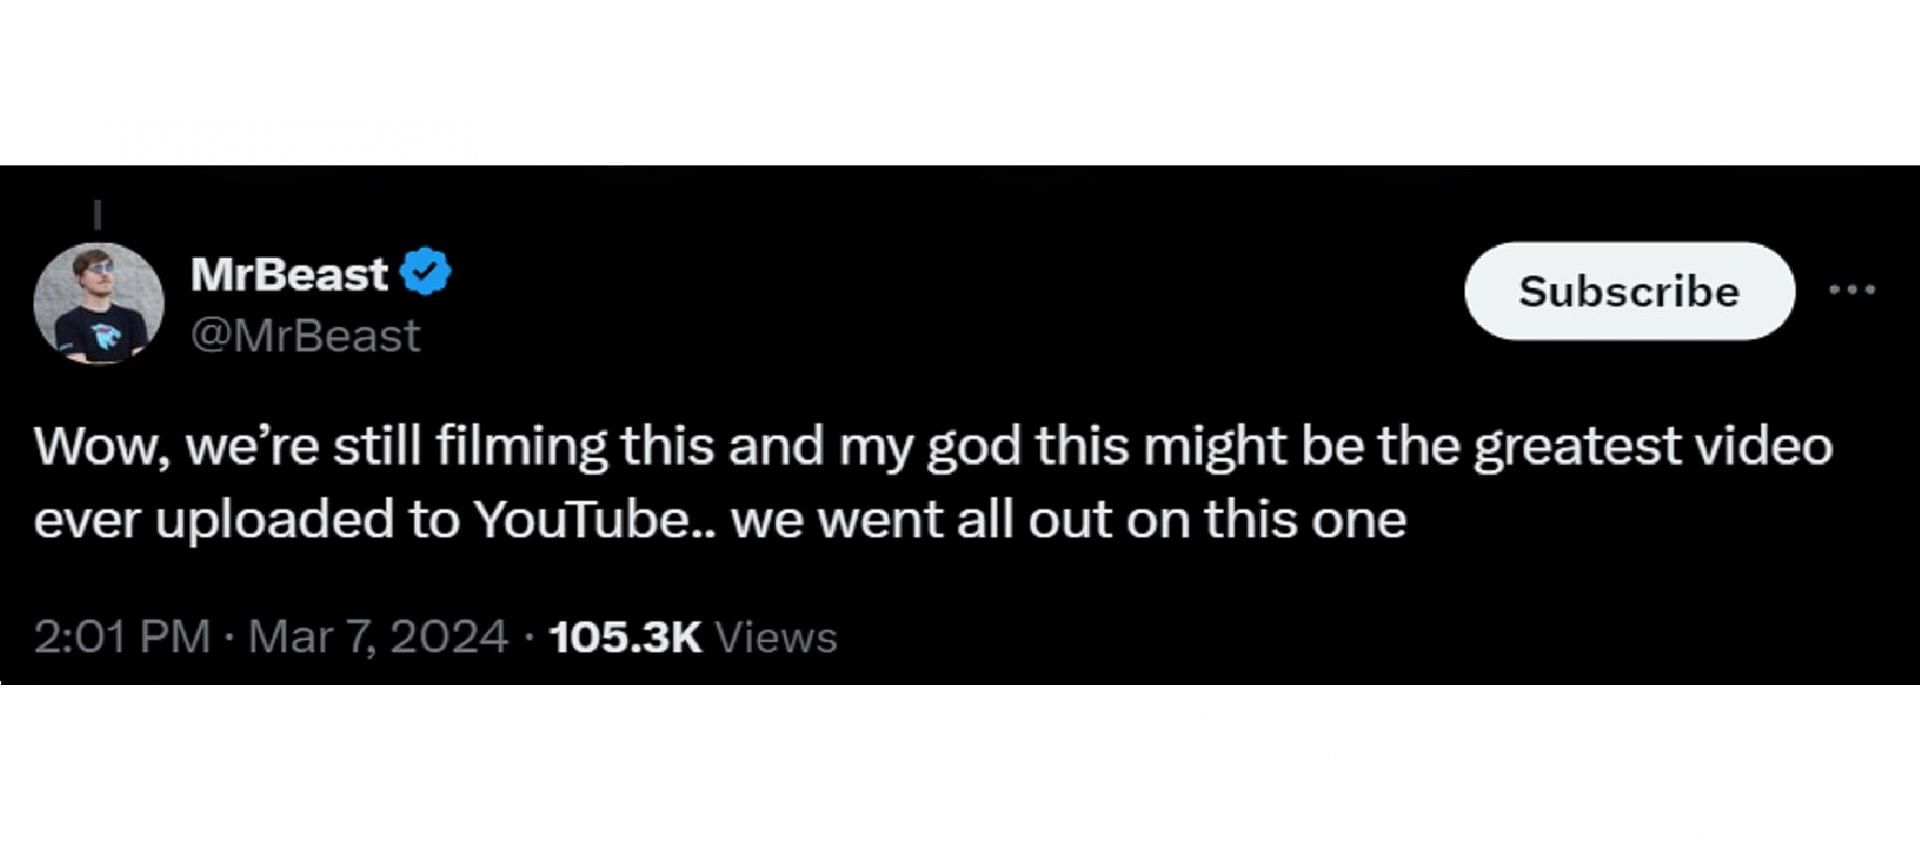 Jimmy teases upcoming video on YouTube, calls it &quot;the greatest&quot; (Image via X)